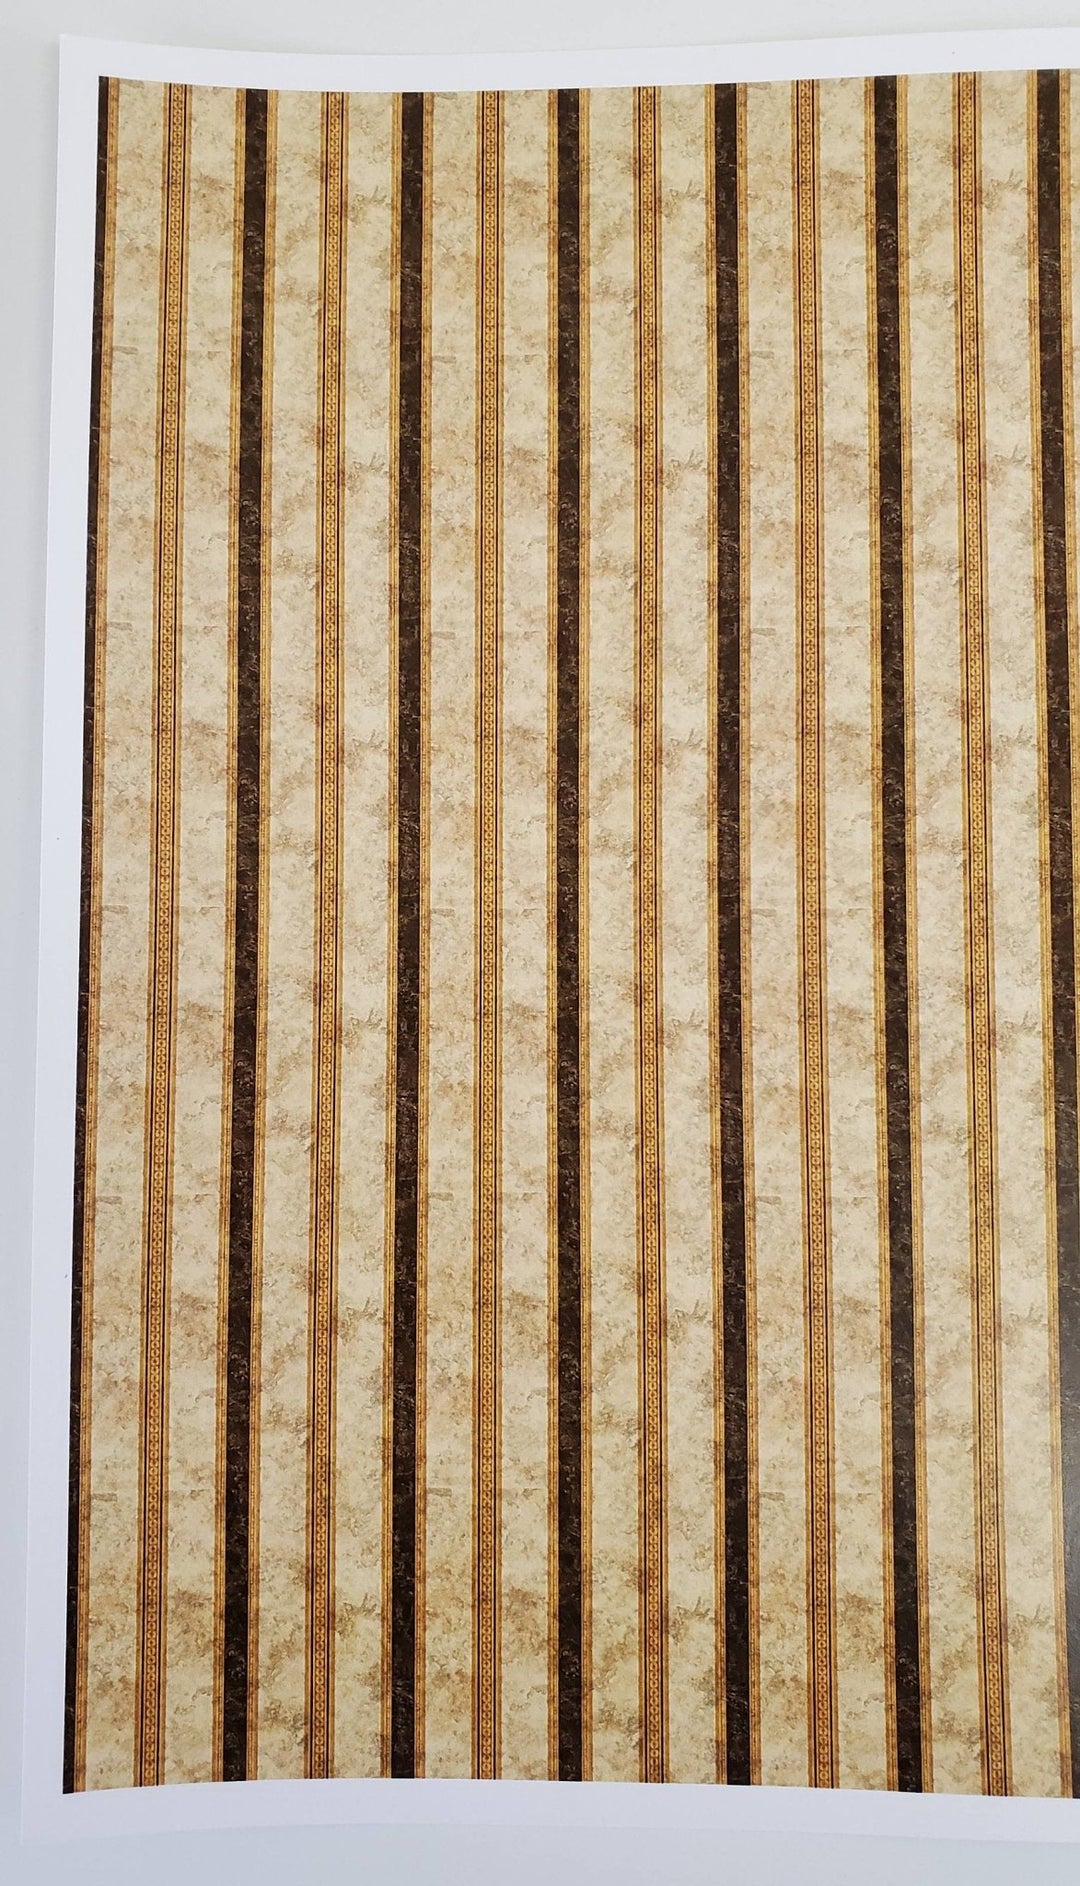 Dollhouse Wallpaper Striped Black Gold Brown 1:12 Scale Itsy Bitsy Miniatures - Miniature Crush